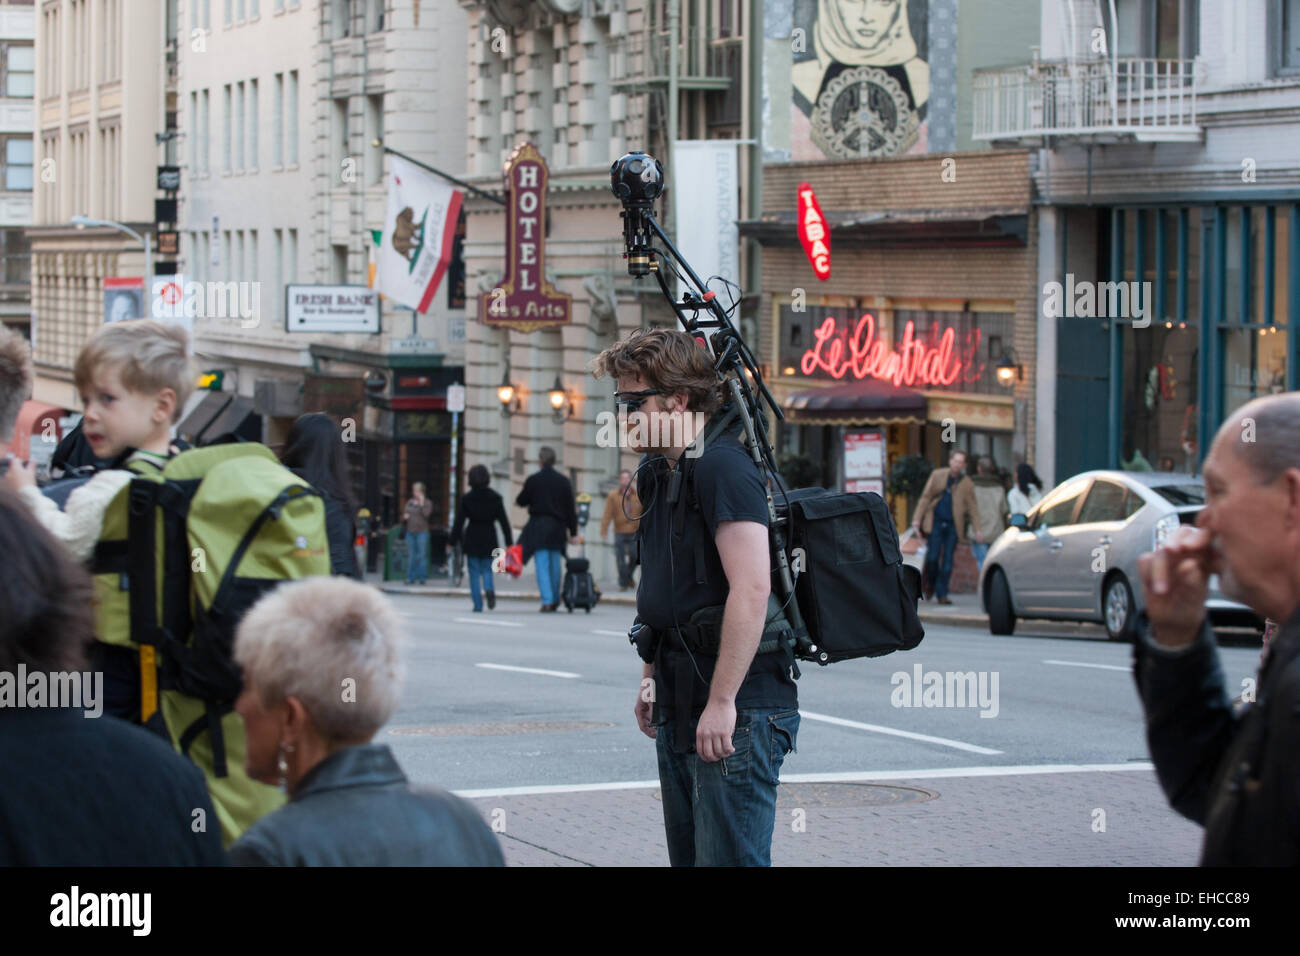 Man with camera and mapping backpack in San Francisco. Stock Photo